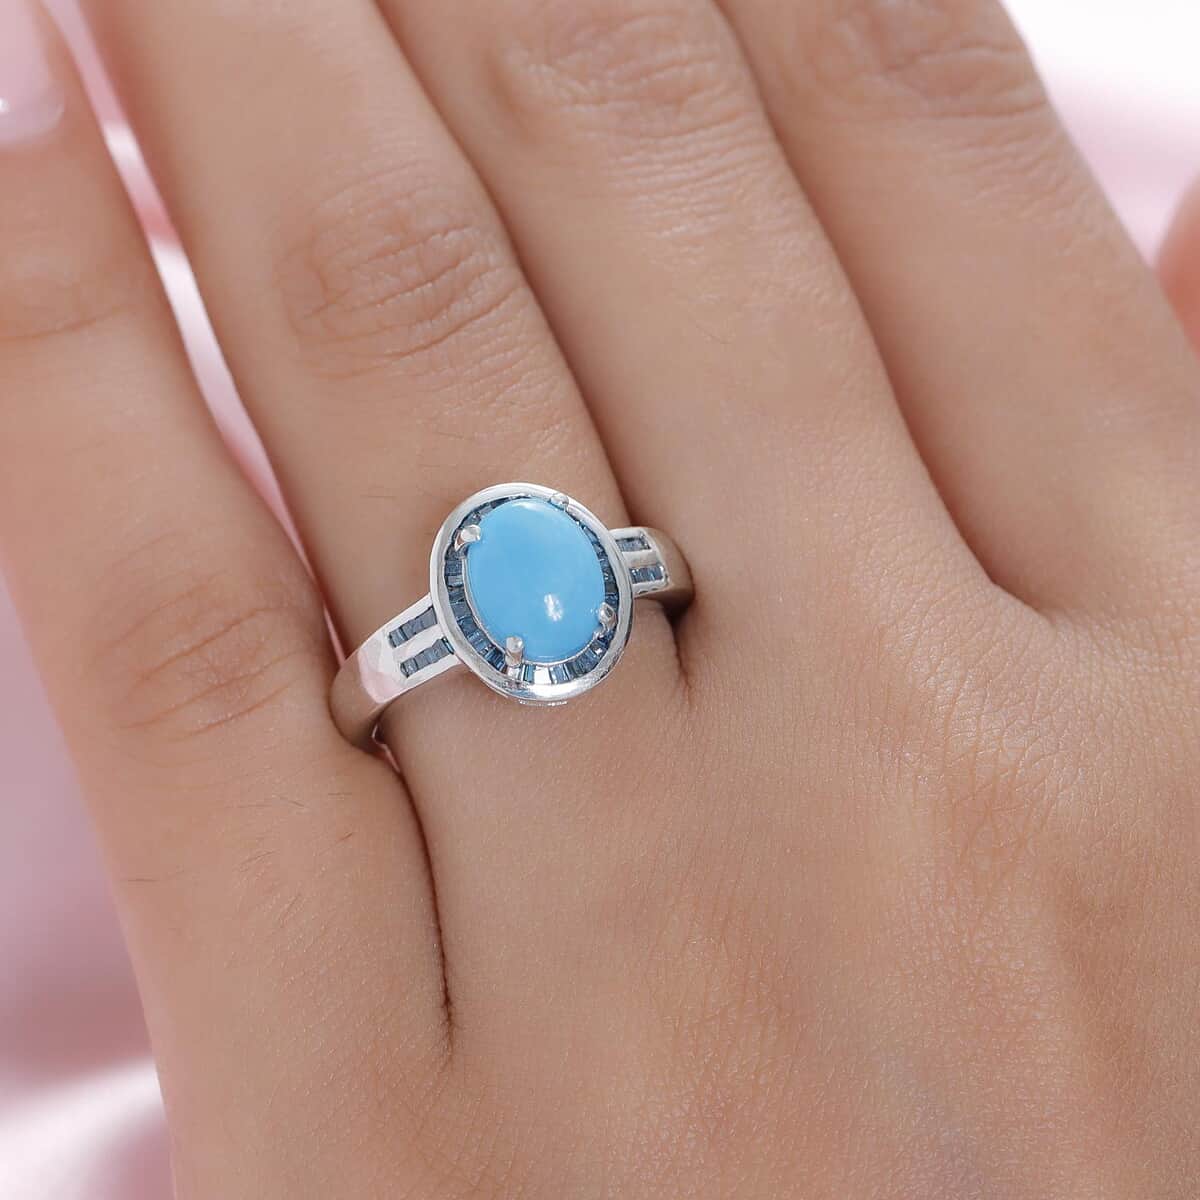 premium-american-natural-sleeping-beauty-turquoise-and-blue-diamond-halo-ring-in-platinum-over-sterling-silver-size-5.0-2.35-ctw image number 2